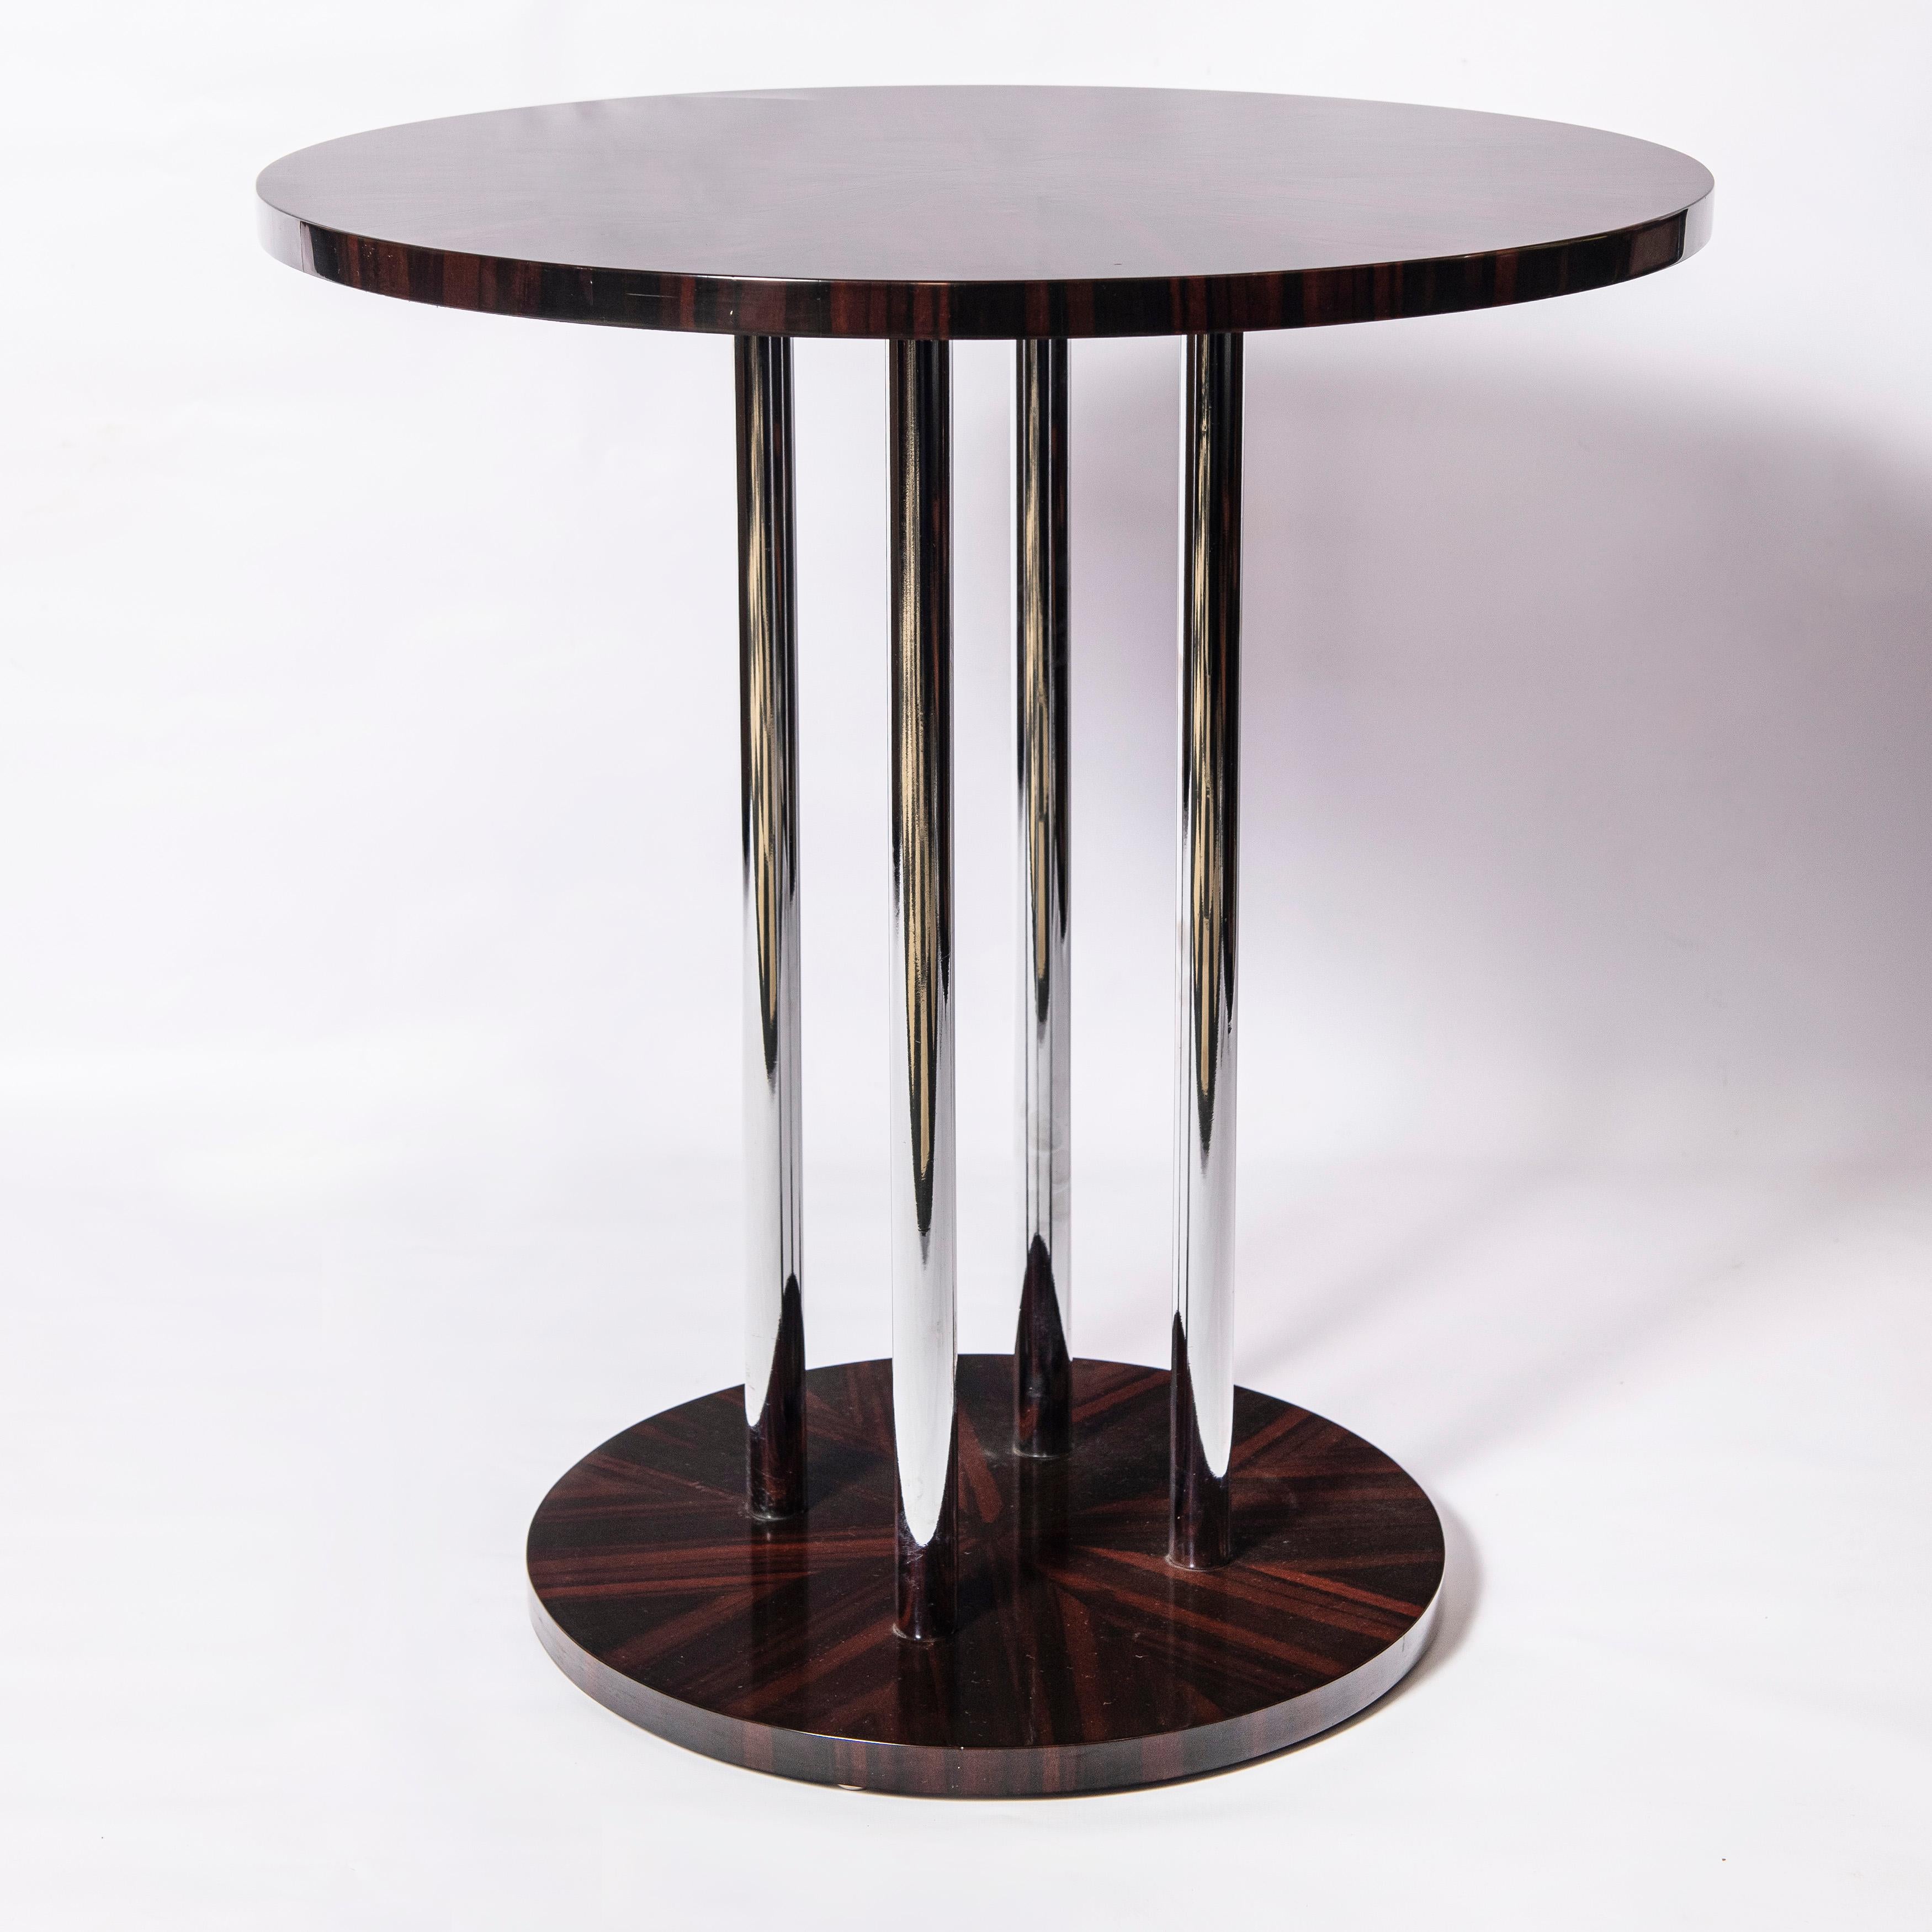 French Pair of Wood and Chrome Metal Side Tables, Art Deco Period, France, circa 1940 For Sale